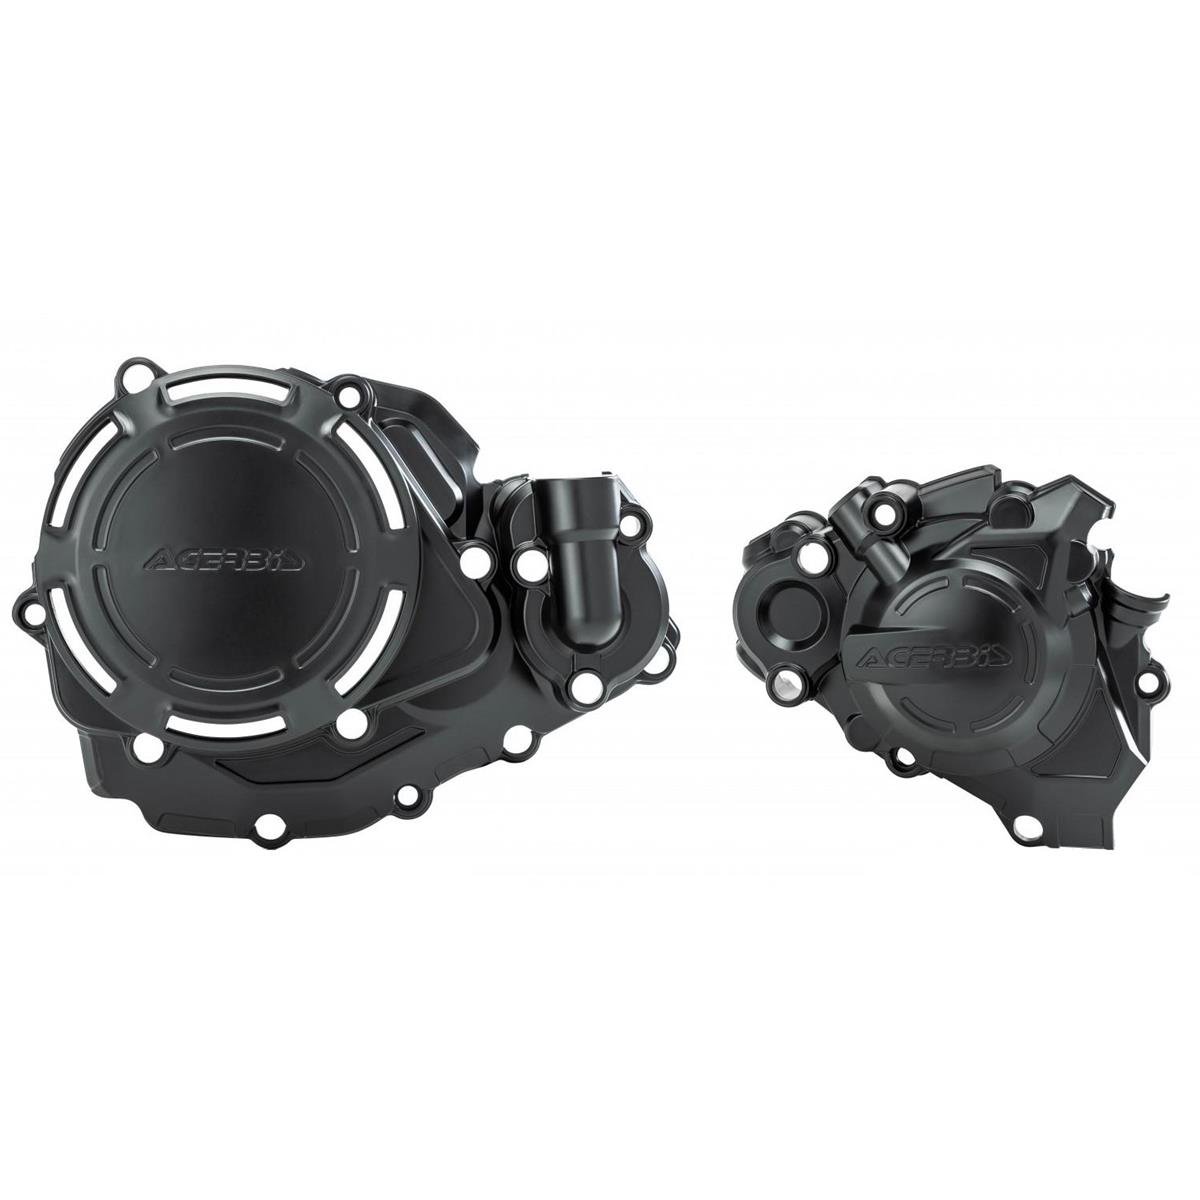 Acerbis Clutch/Ignition Cover Protection X-Power Honda CRF 450 17-20, Black